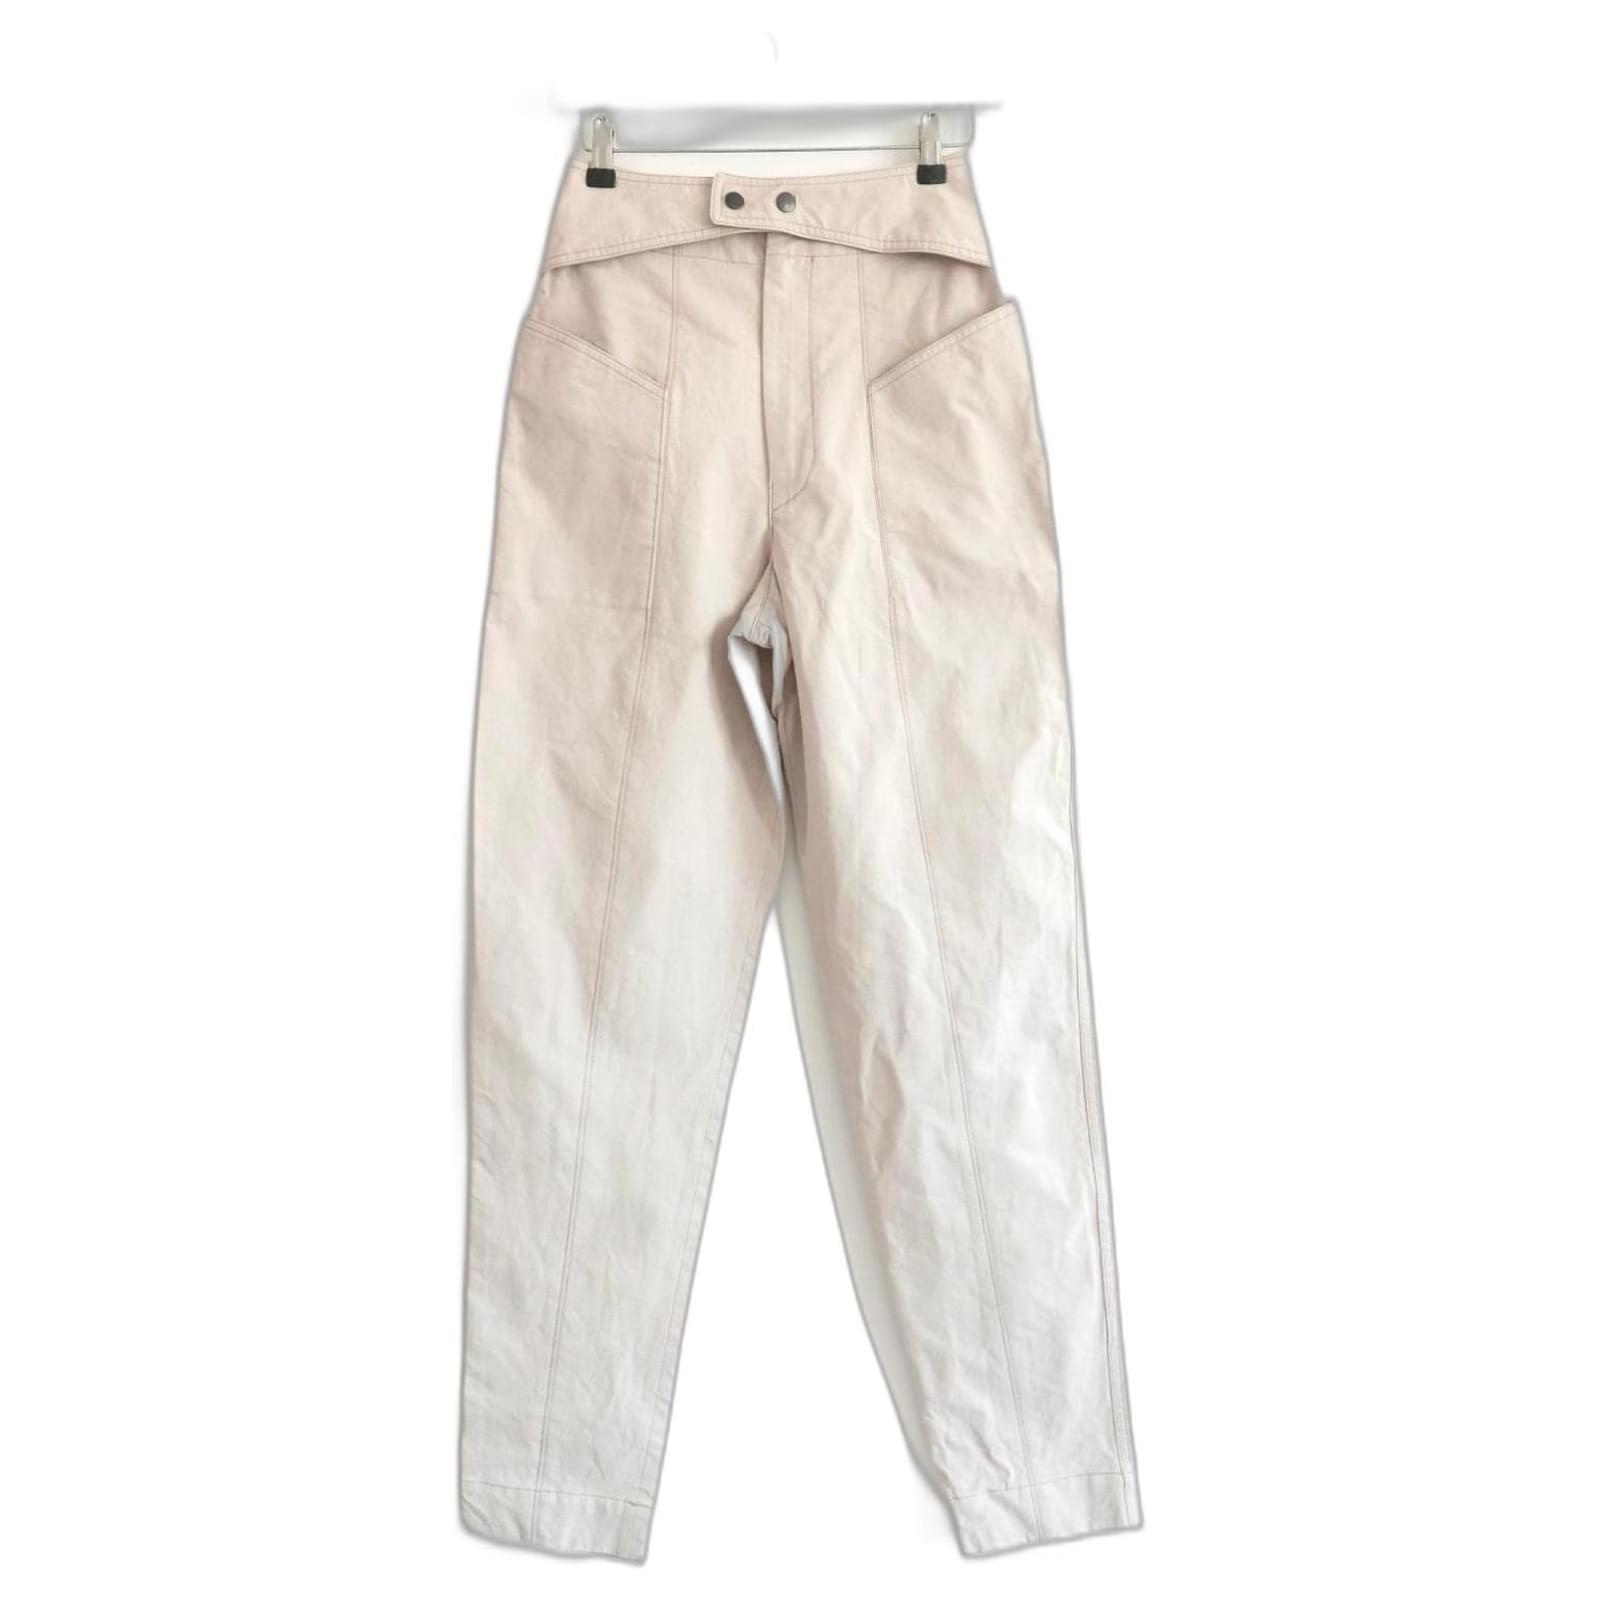 Buy Joules Rue Jodhpur Trousers from the Joules online shop